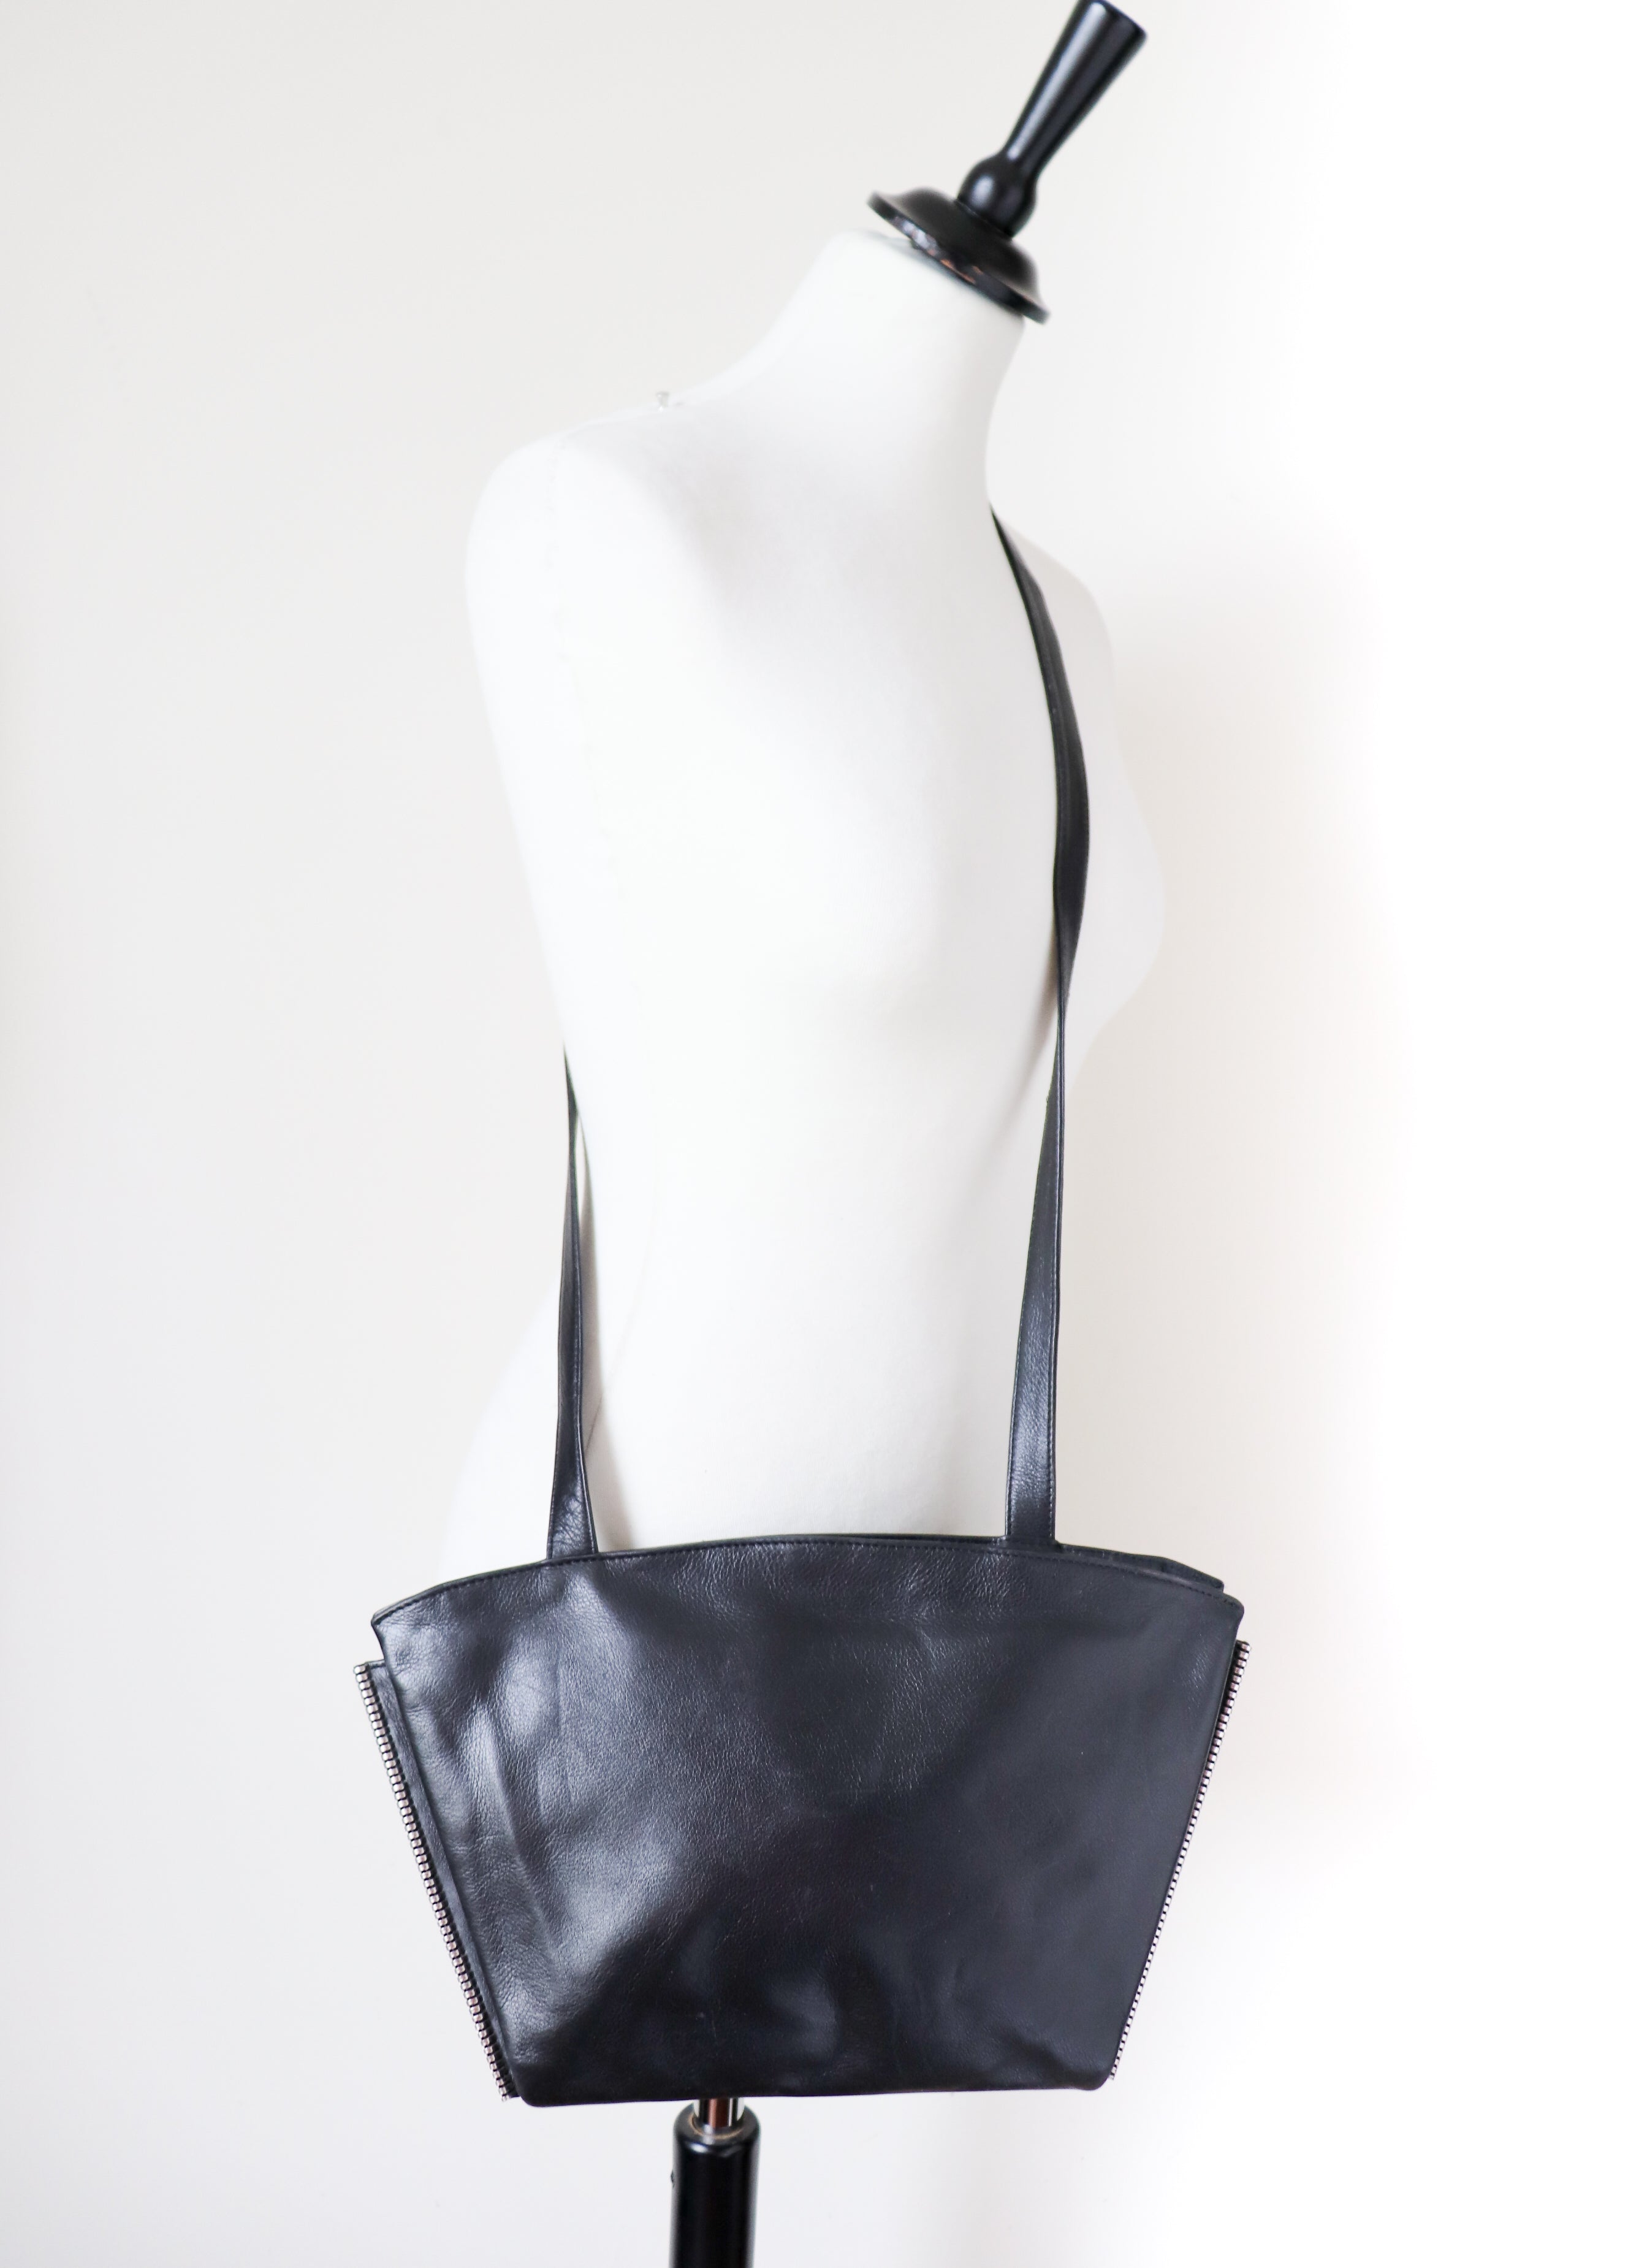 Vintage Crossbody Bag - 1980s - Black Faux  Leather - GROOM - Small